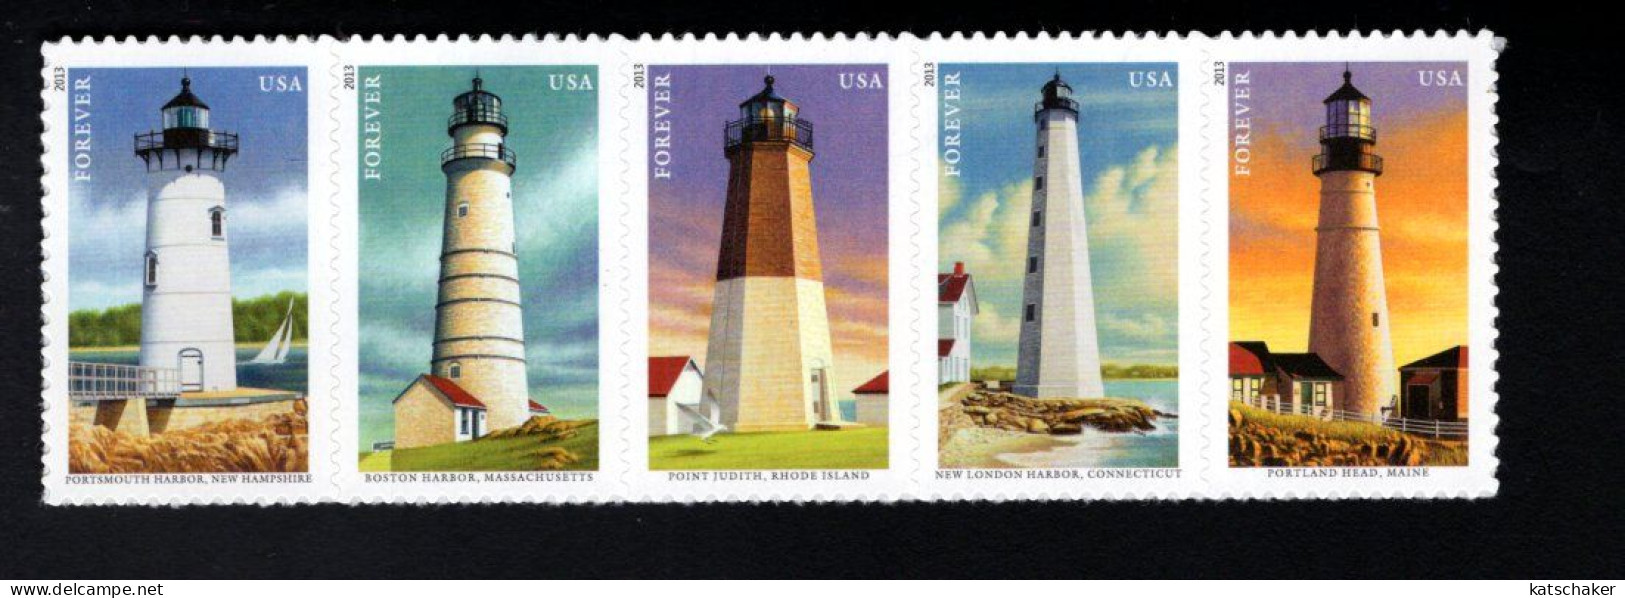 1738943655 2013  (XX) SCOTT 4795A POSTFRIS MINT NEVER HINGED - LIGHTHOUSES 4792FIRST STAMP OF STRIP - Unused Stamps